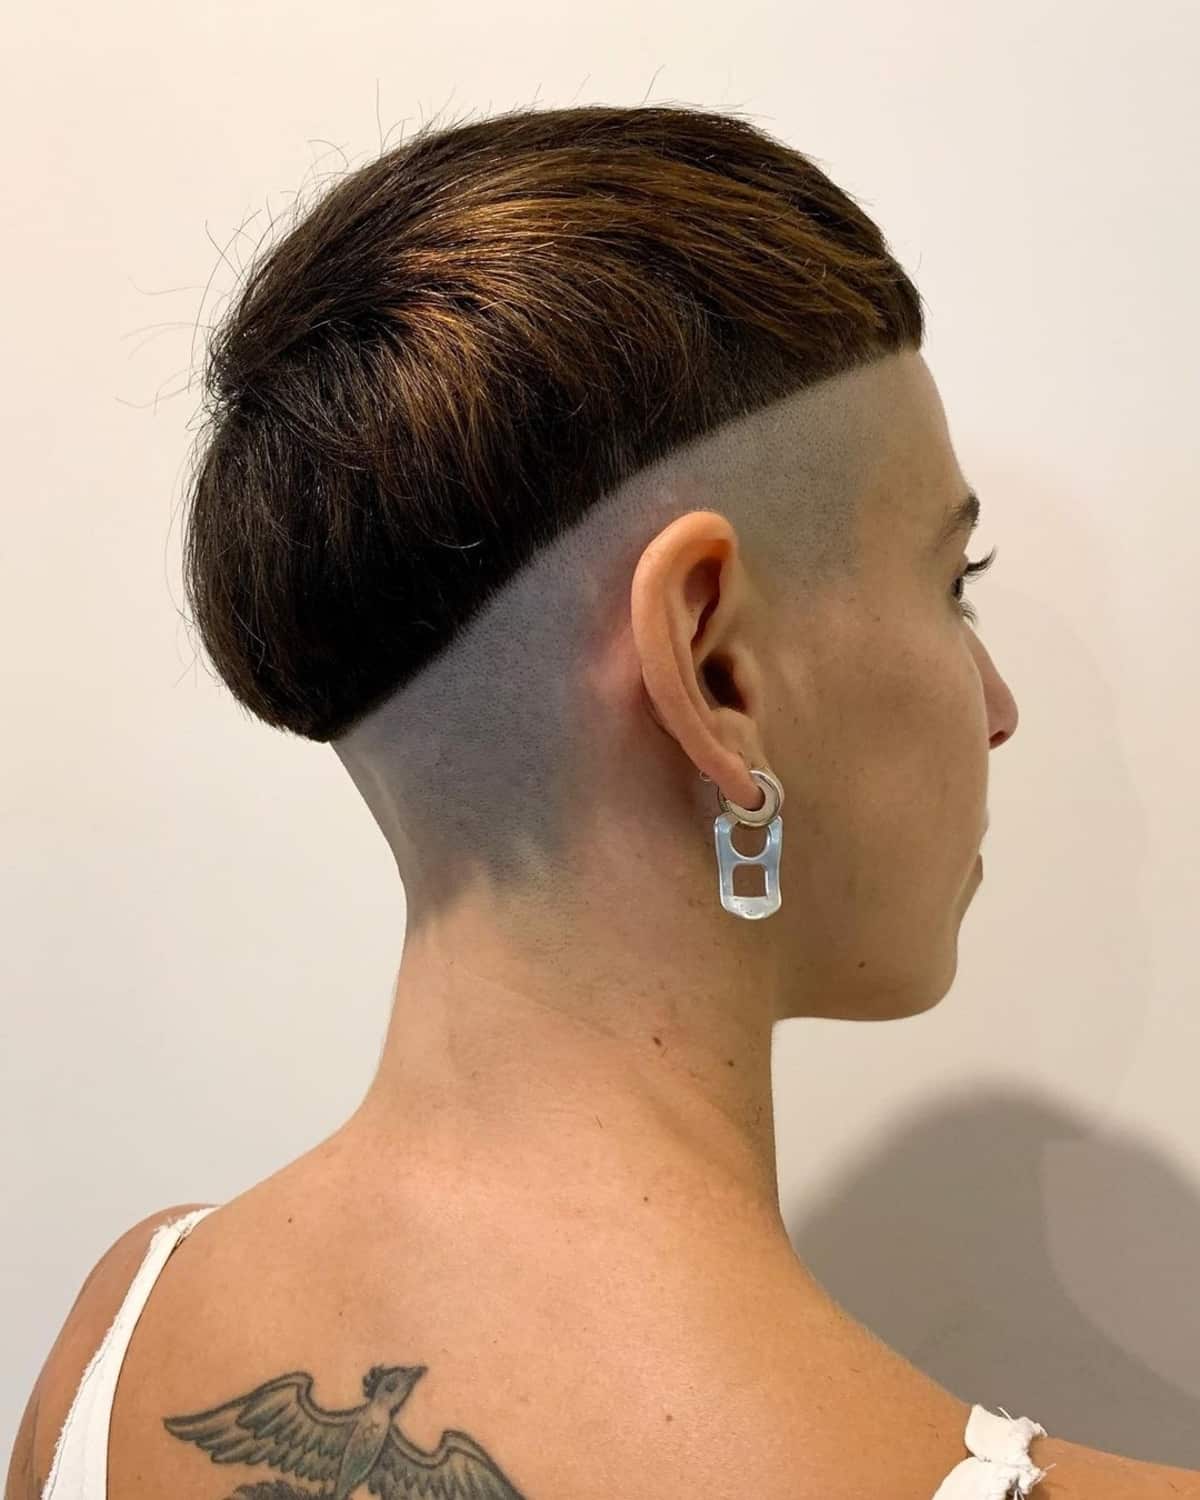 Bowl cut hairstyle with shaved sides